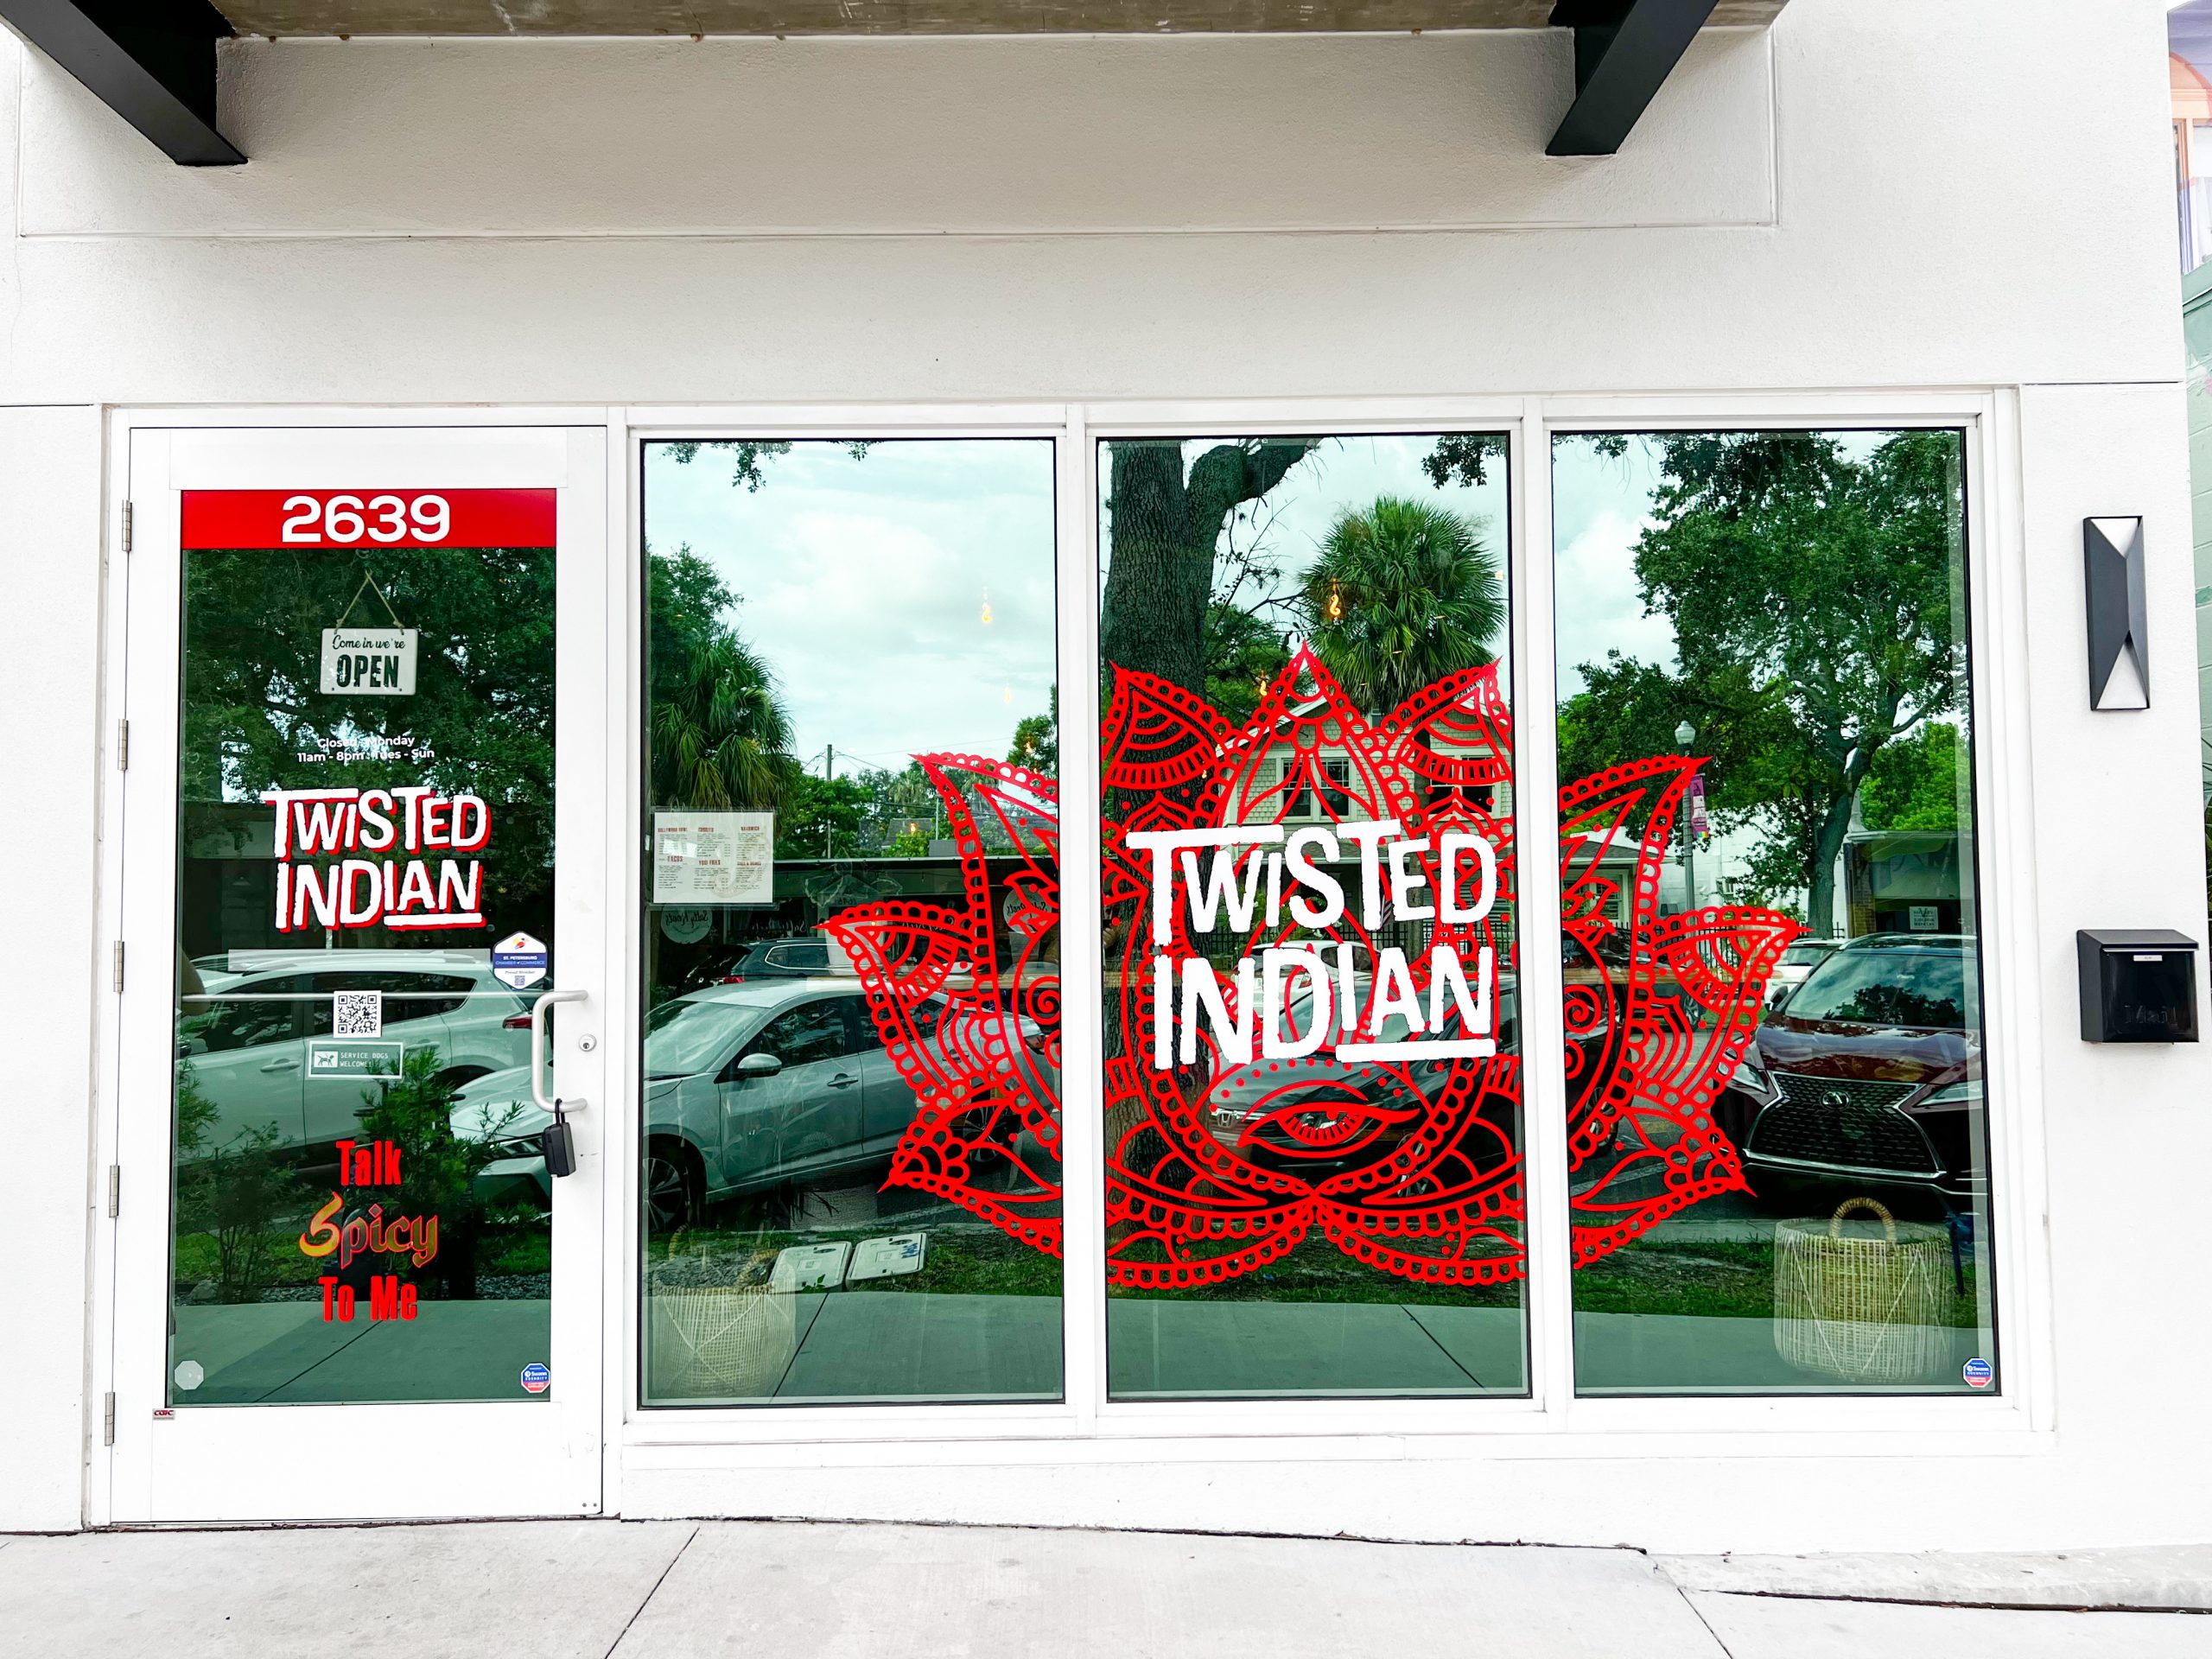 The entrance of The Twisted Indian